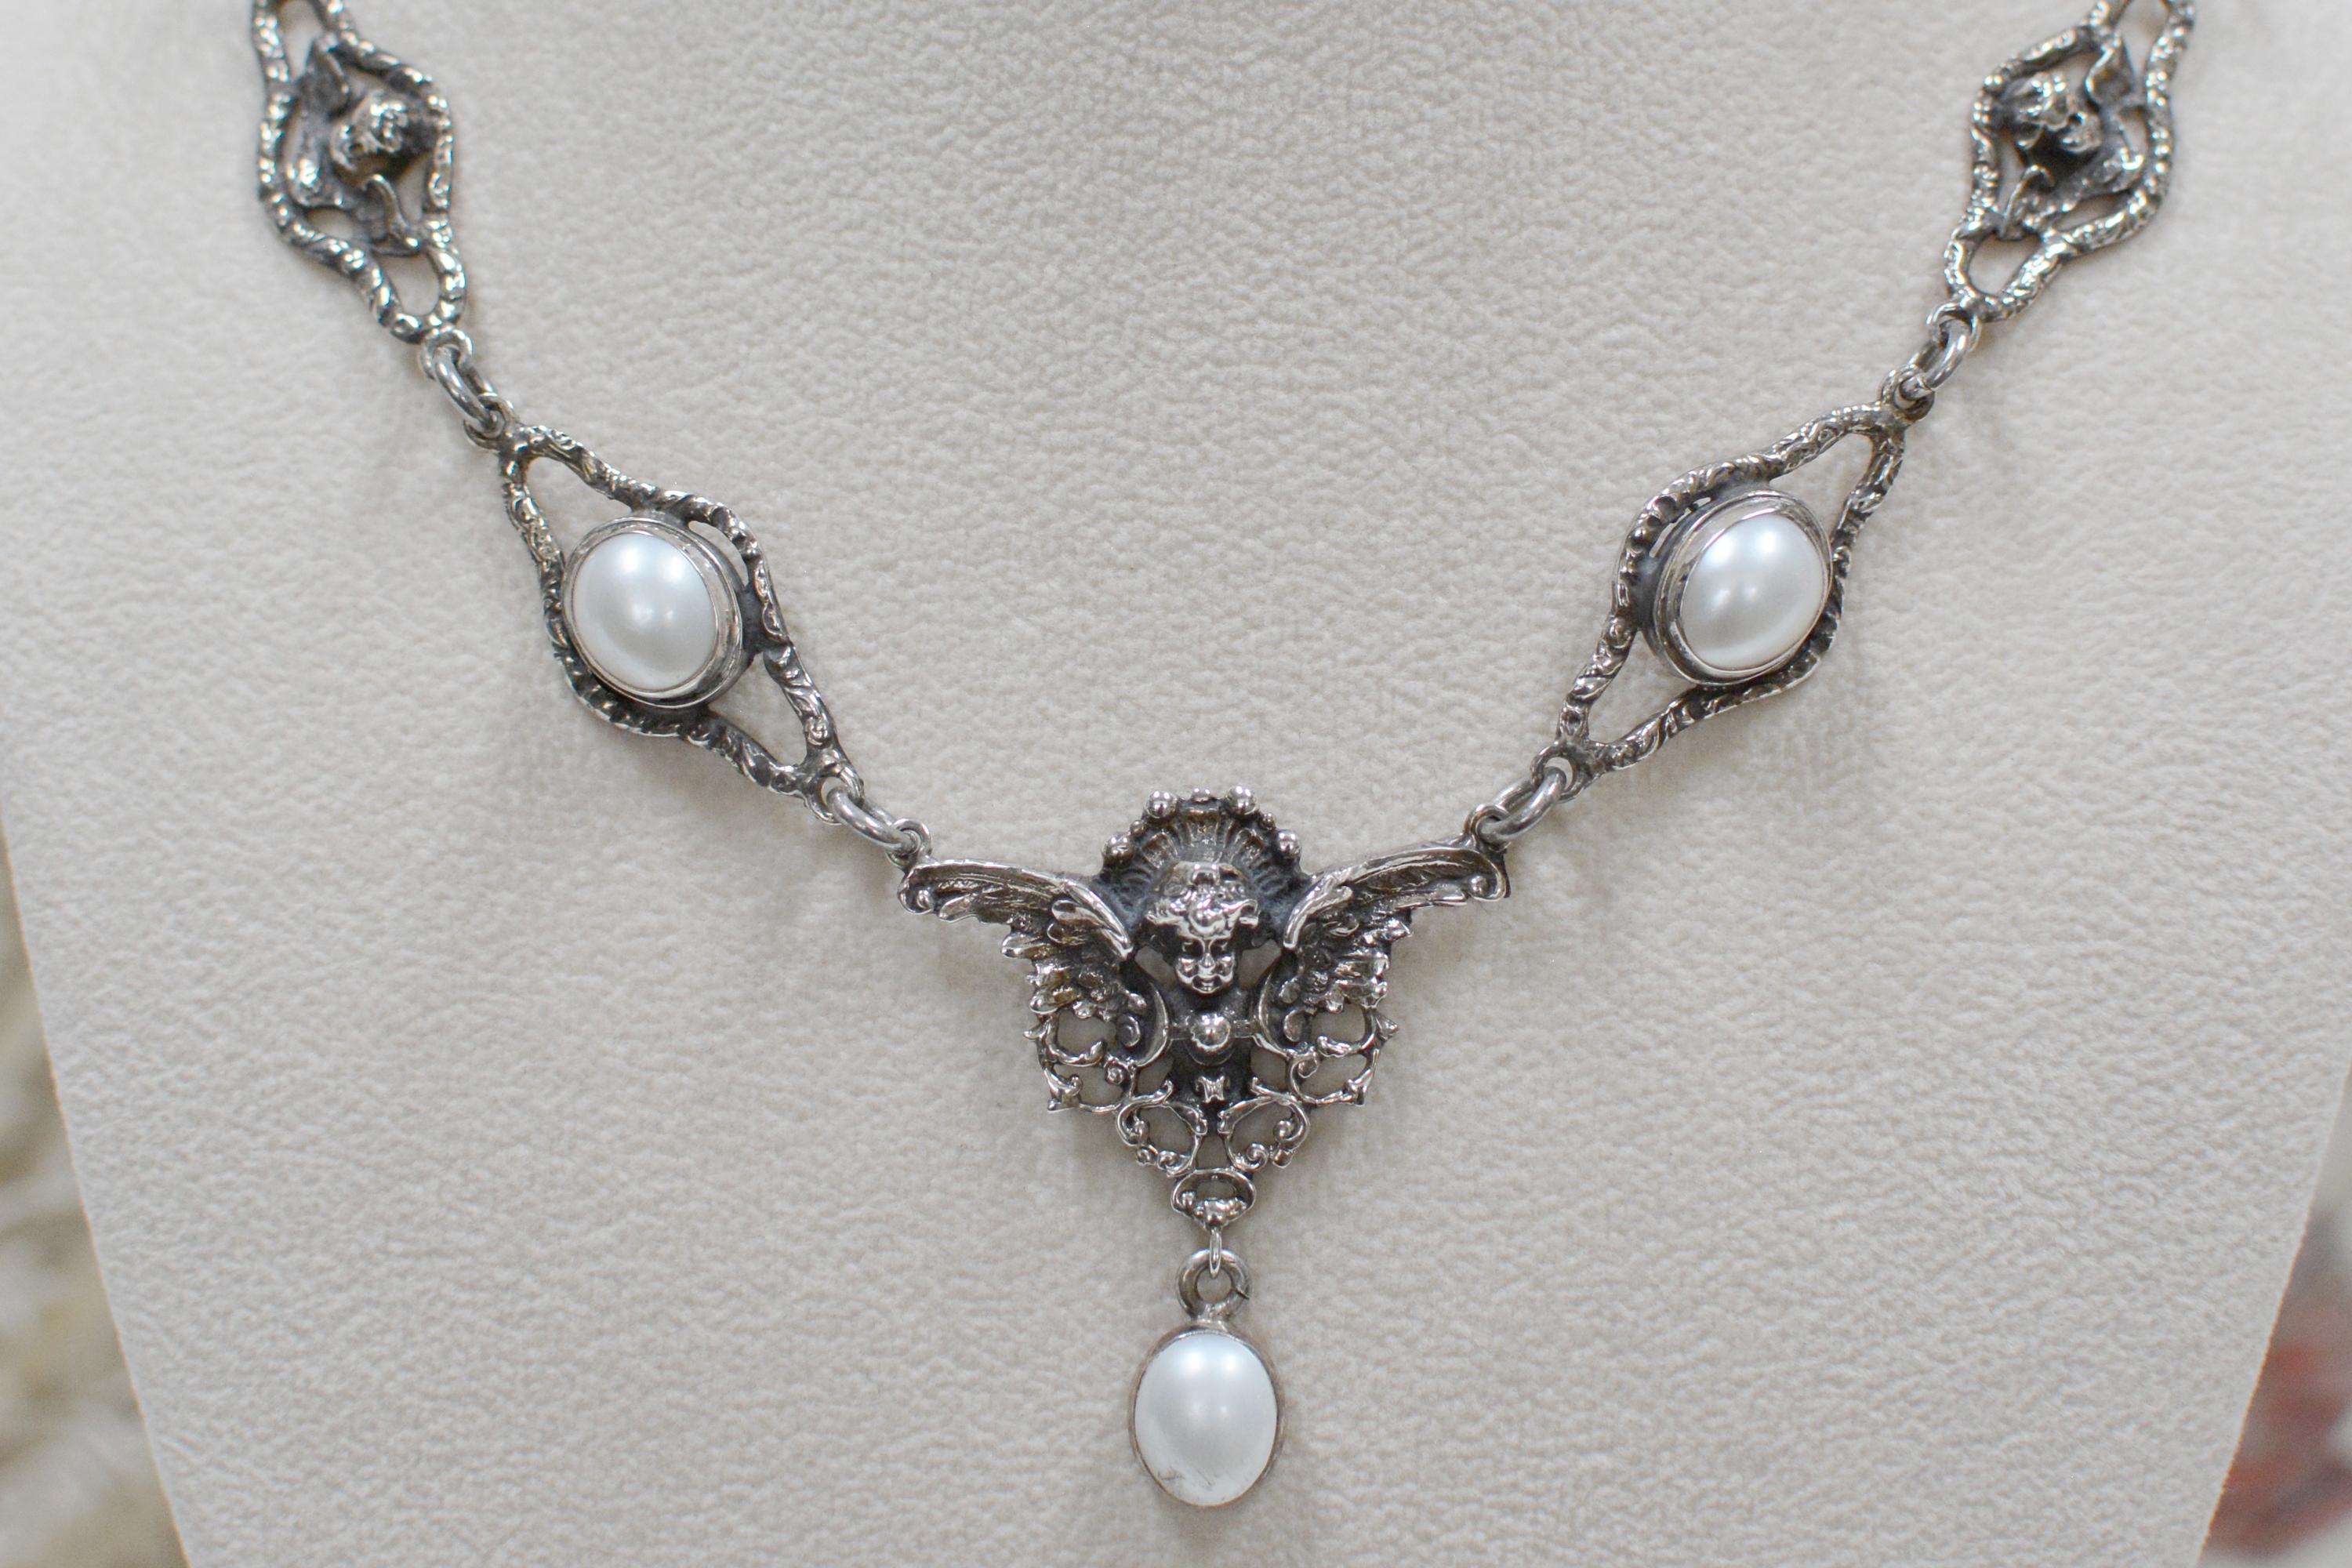 Baroque Jill Garber Collection Figural Angel’s Drop Necklace with Freshwater Pearls